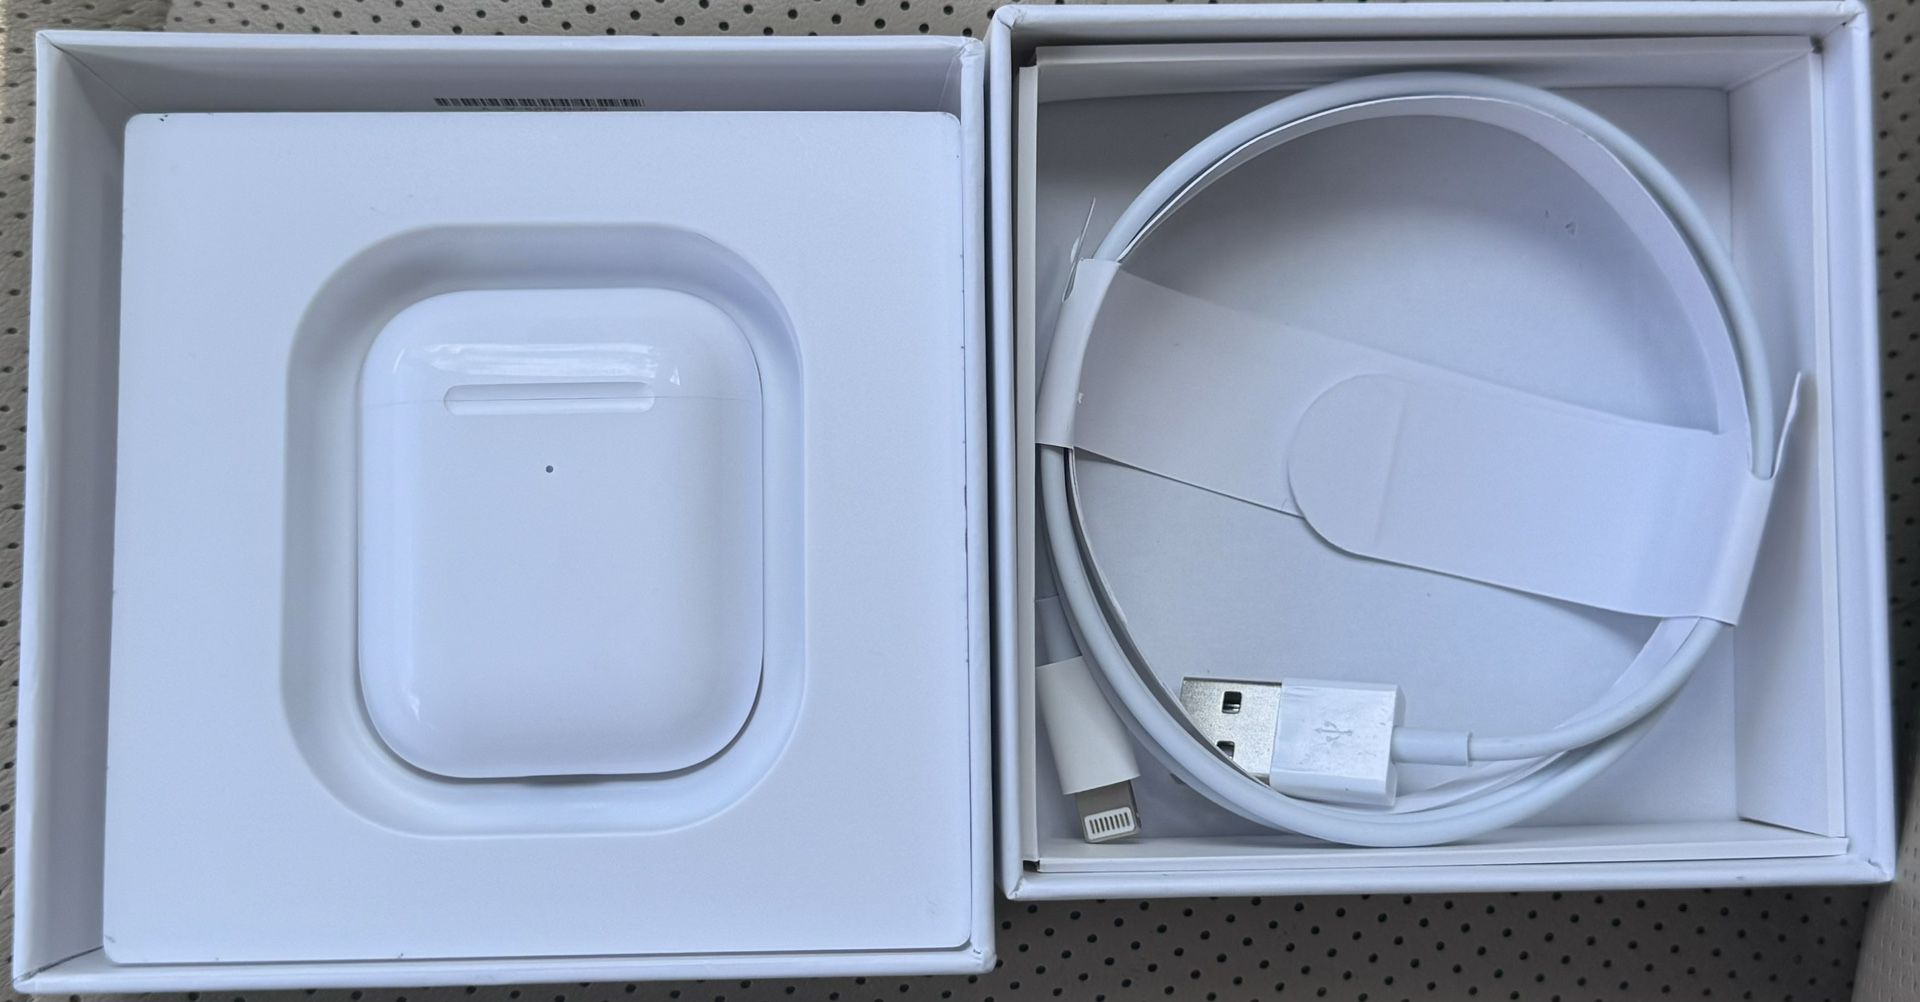 1st Gen AirPods (Negotiable)